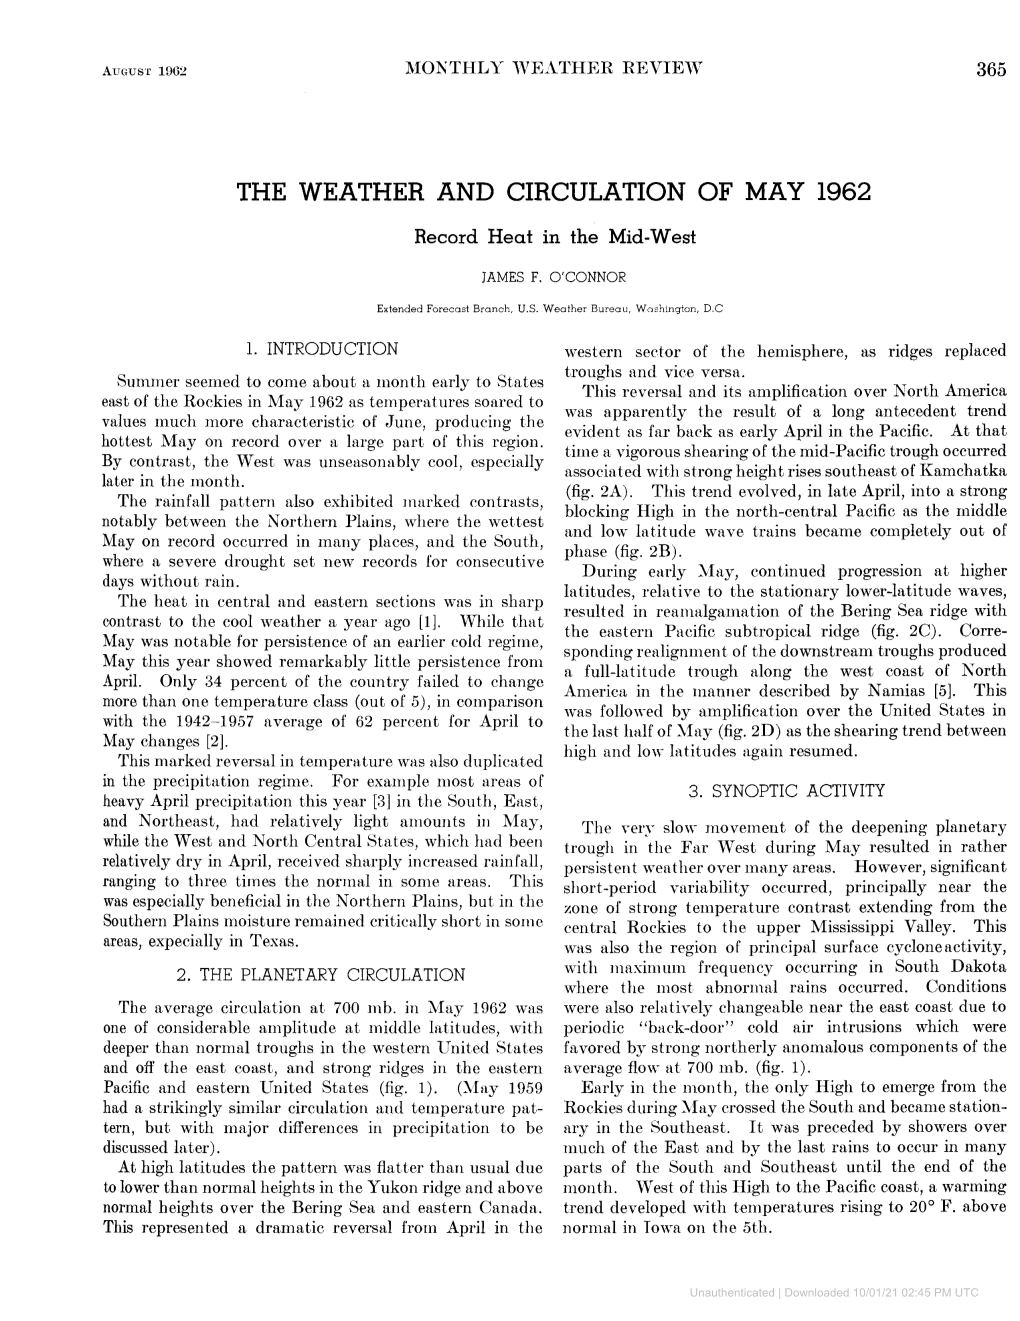 THE WEATHER and CIRCULATION of MAY 1962 Record Heat in the Mid-West